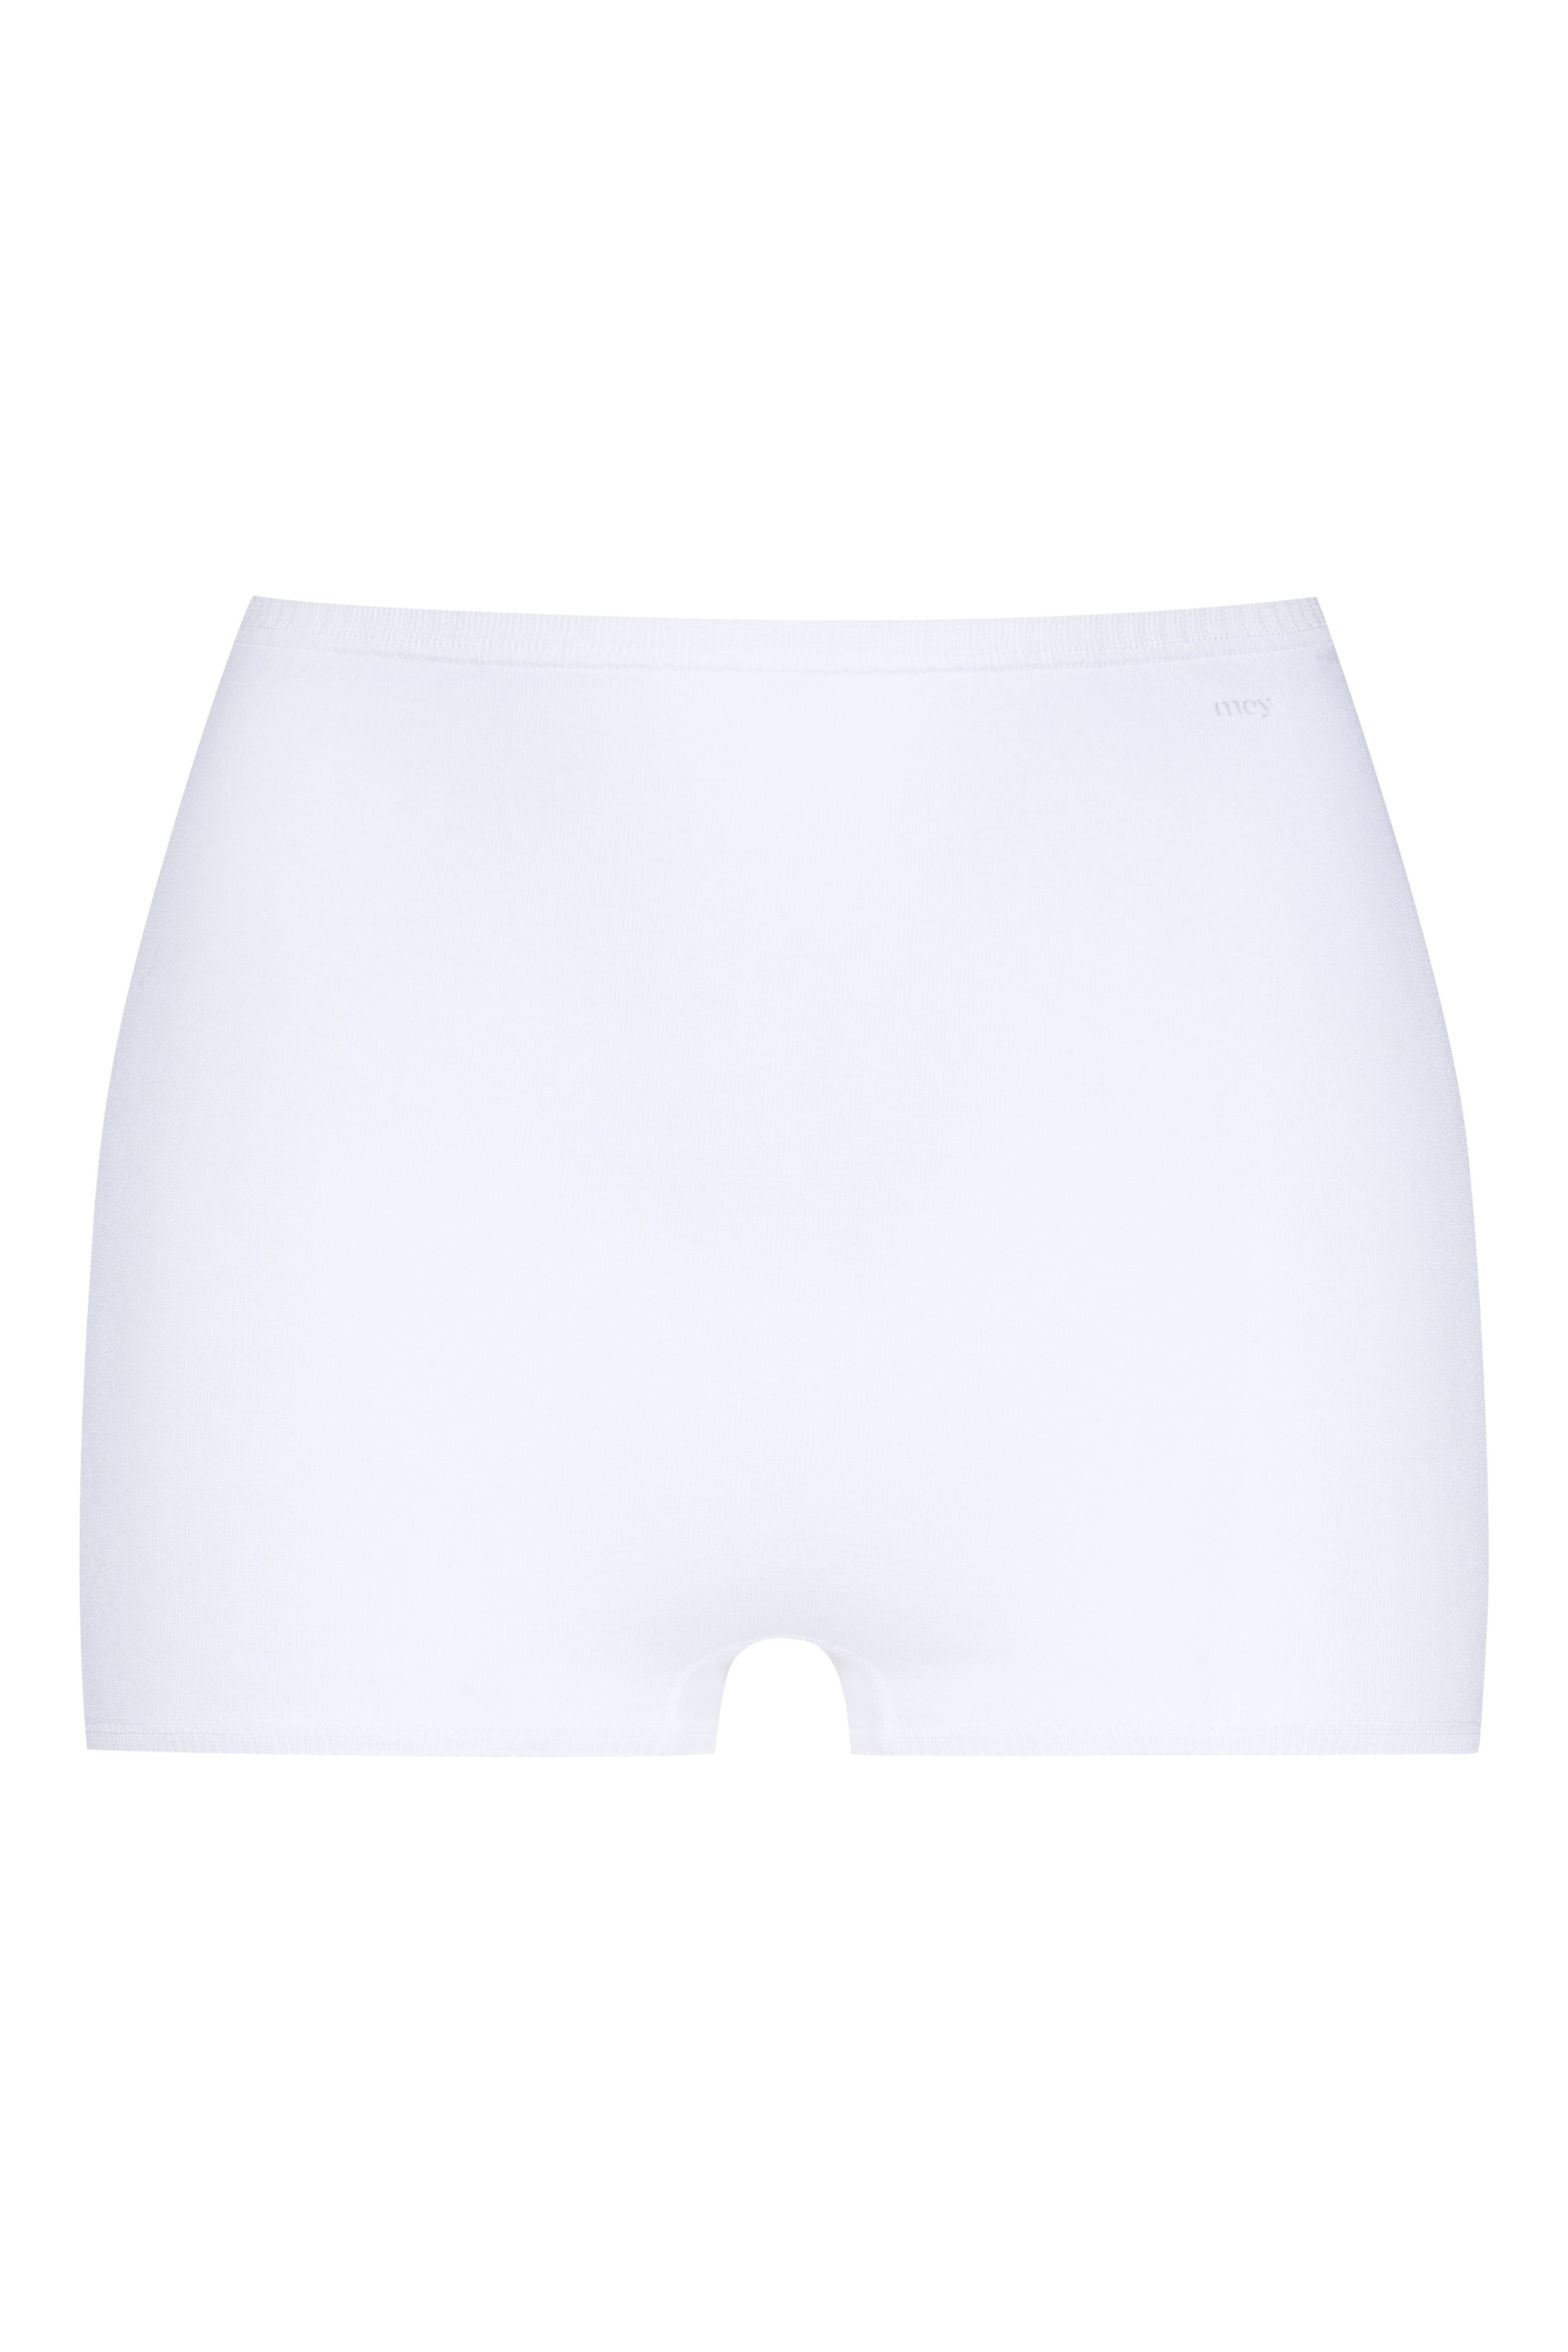 Boxer pants White Serie Only Lycra Cut Out | mey®